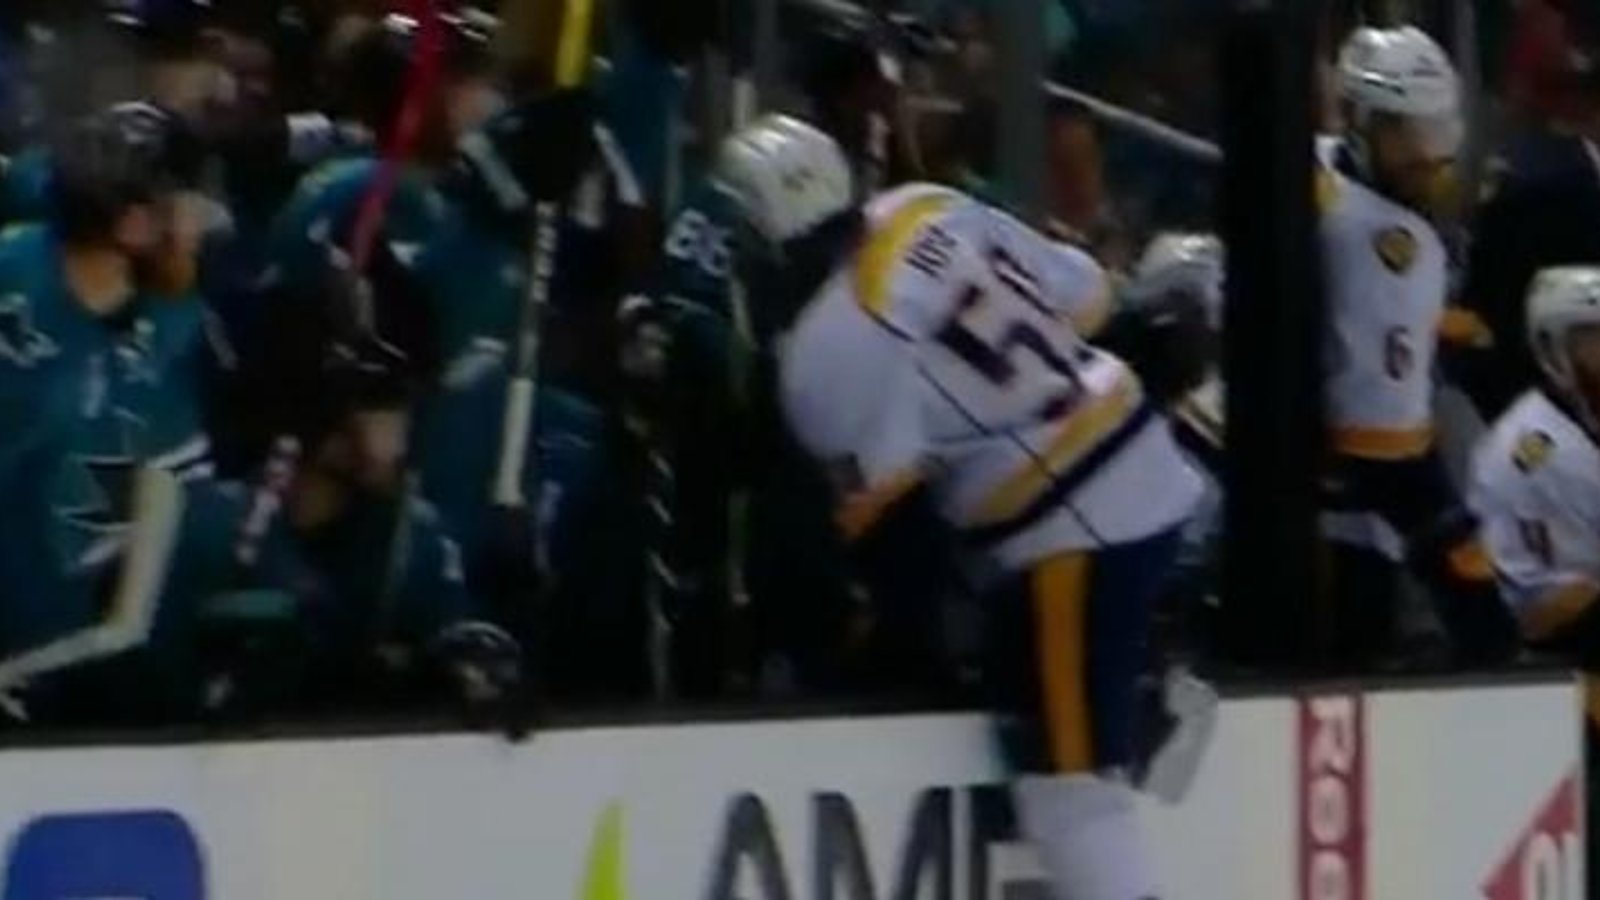 Roman Josi tries to jump on the wrong bench to avoid a penalty.